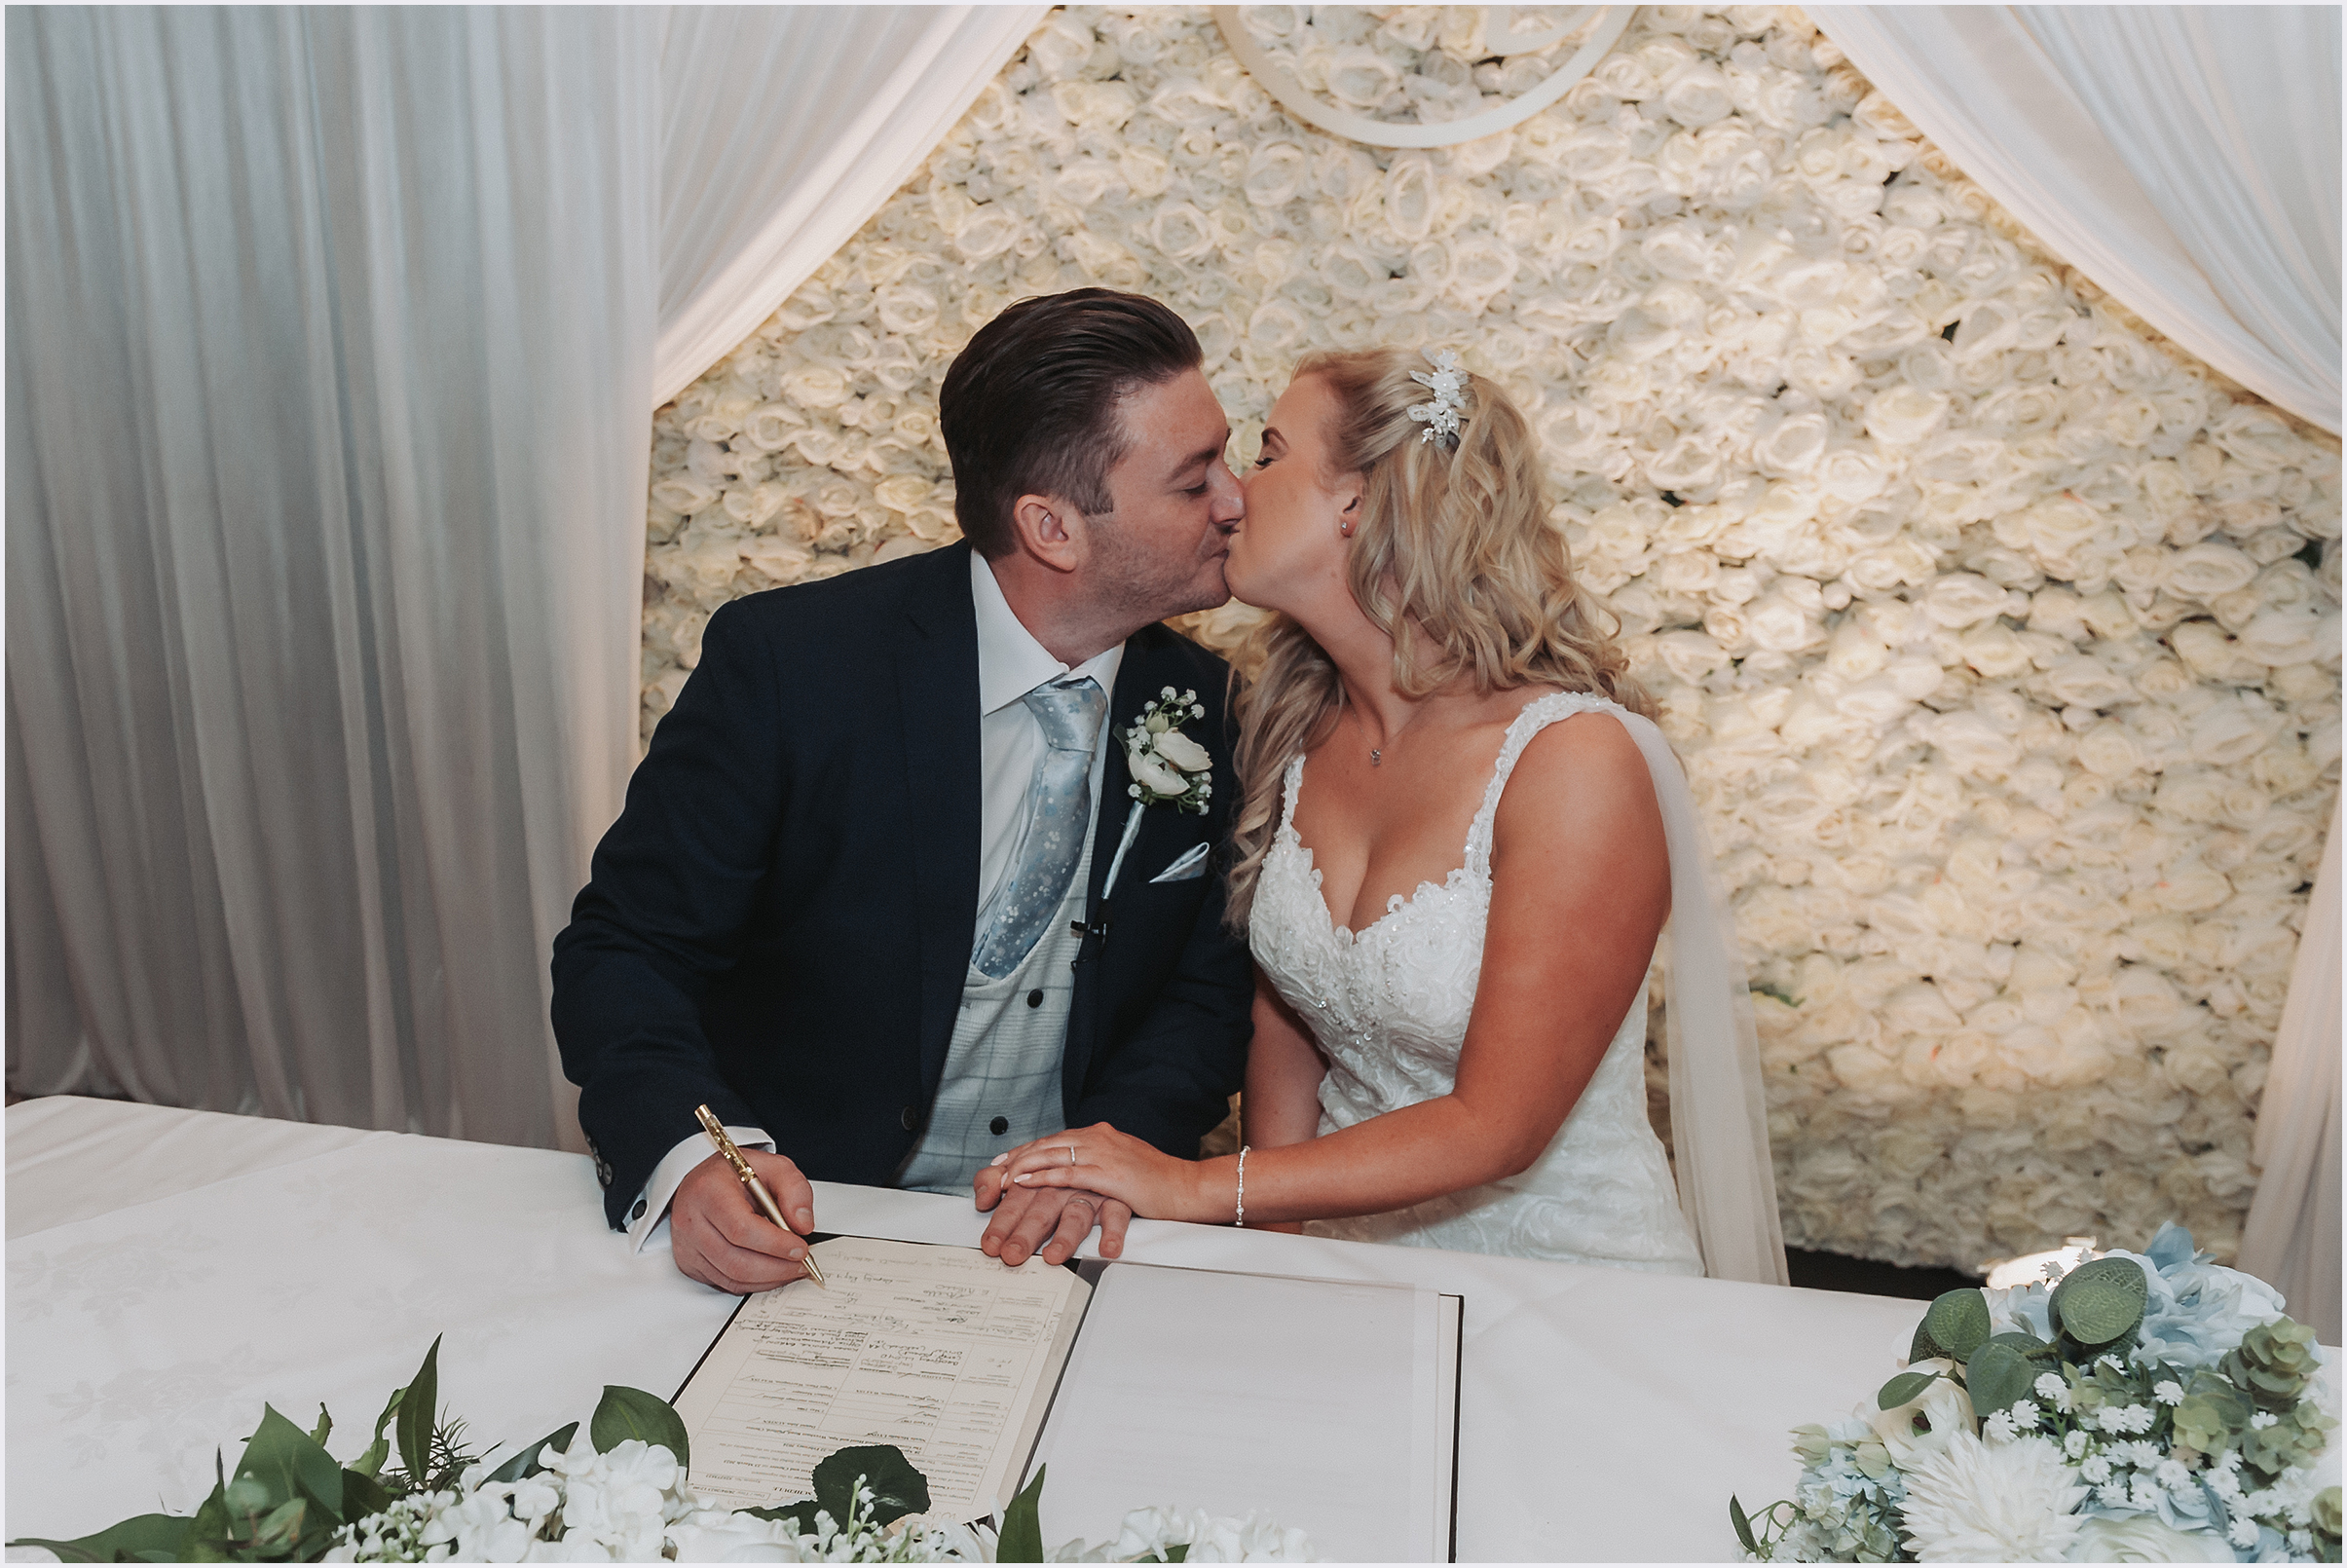 A bride and groom kissing after signing the register at their wedding.